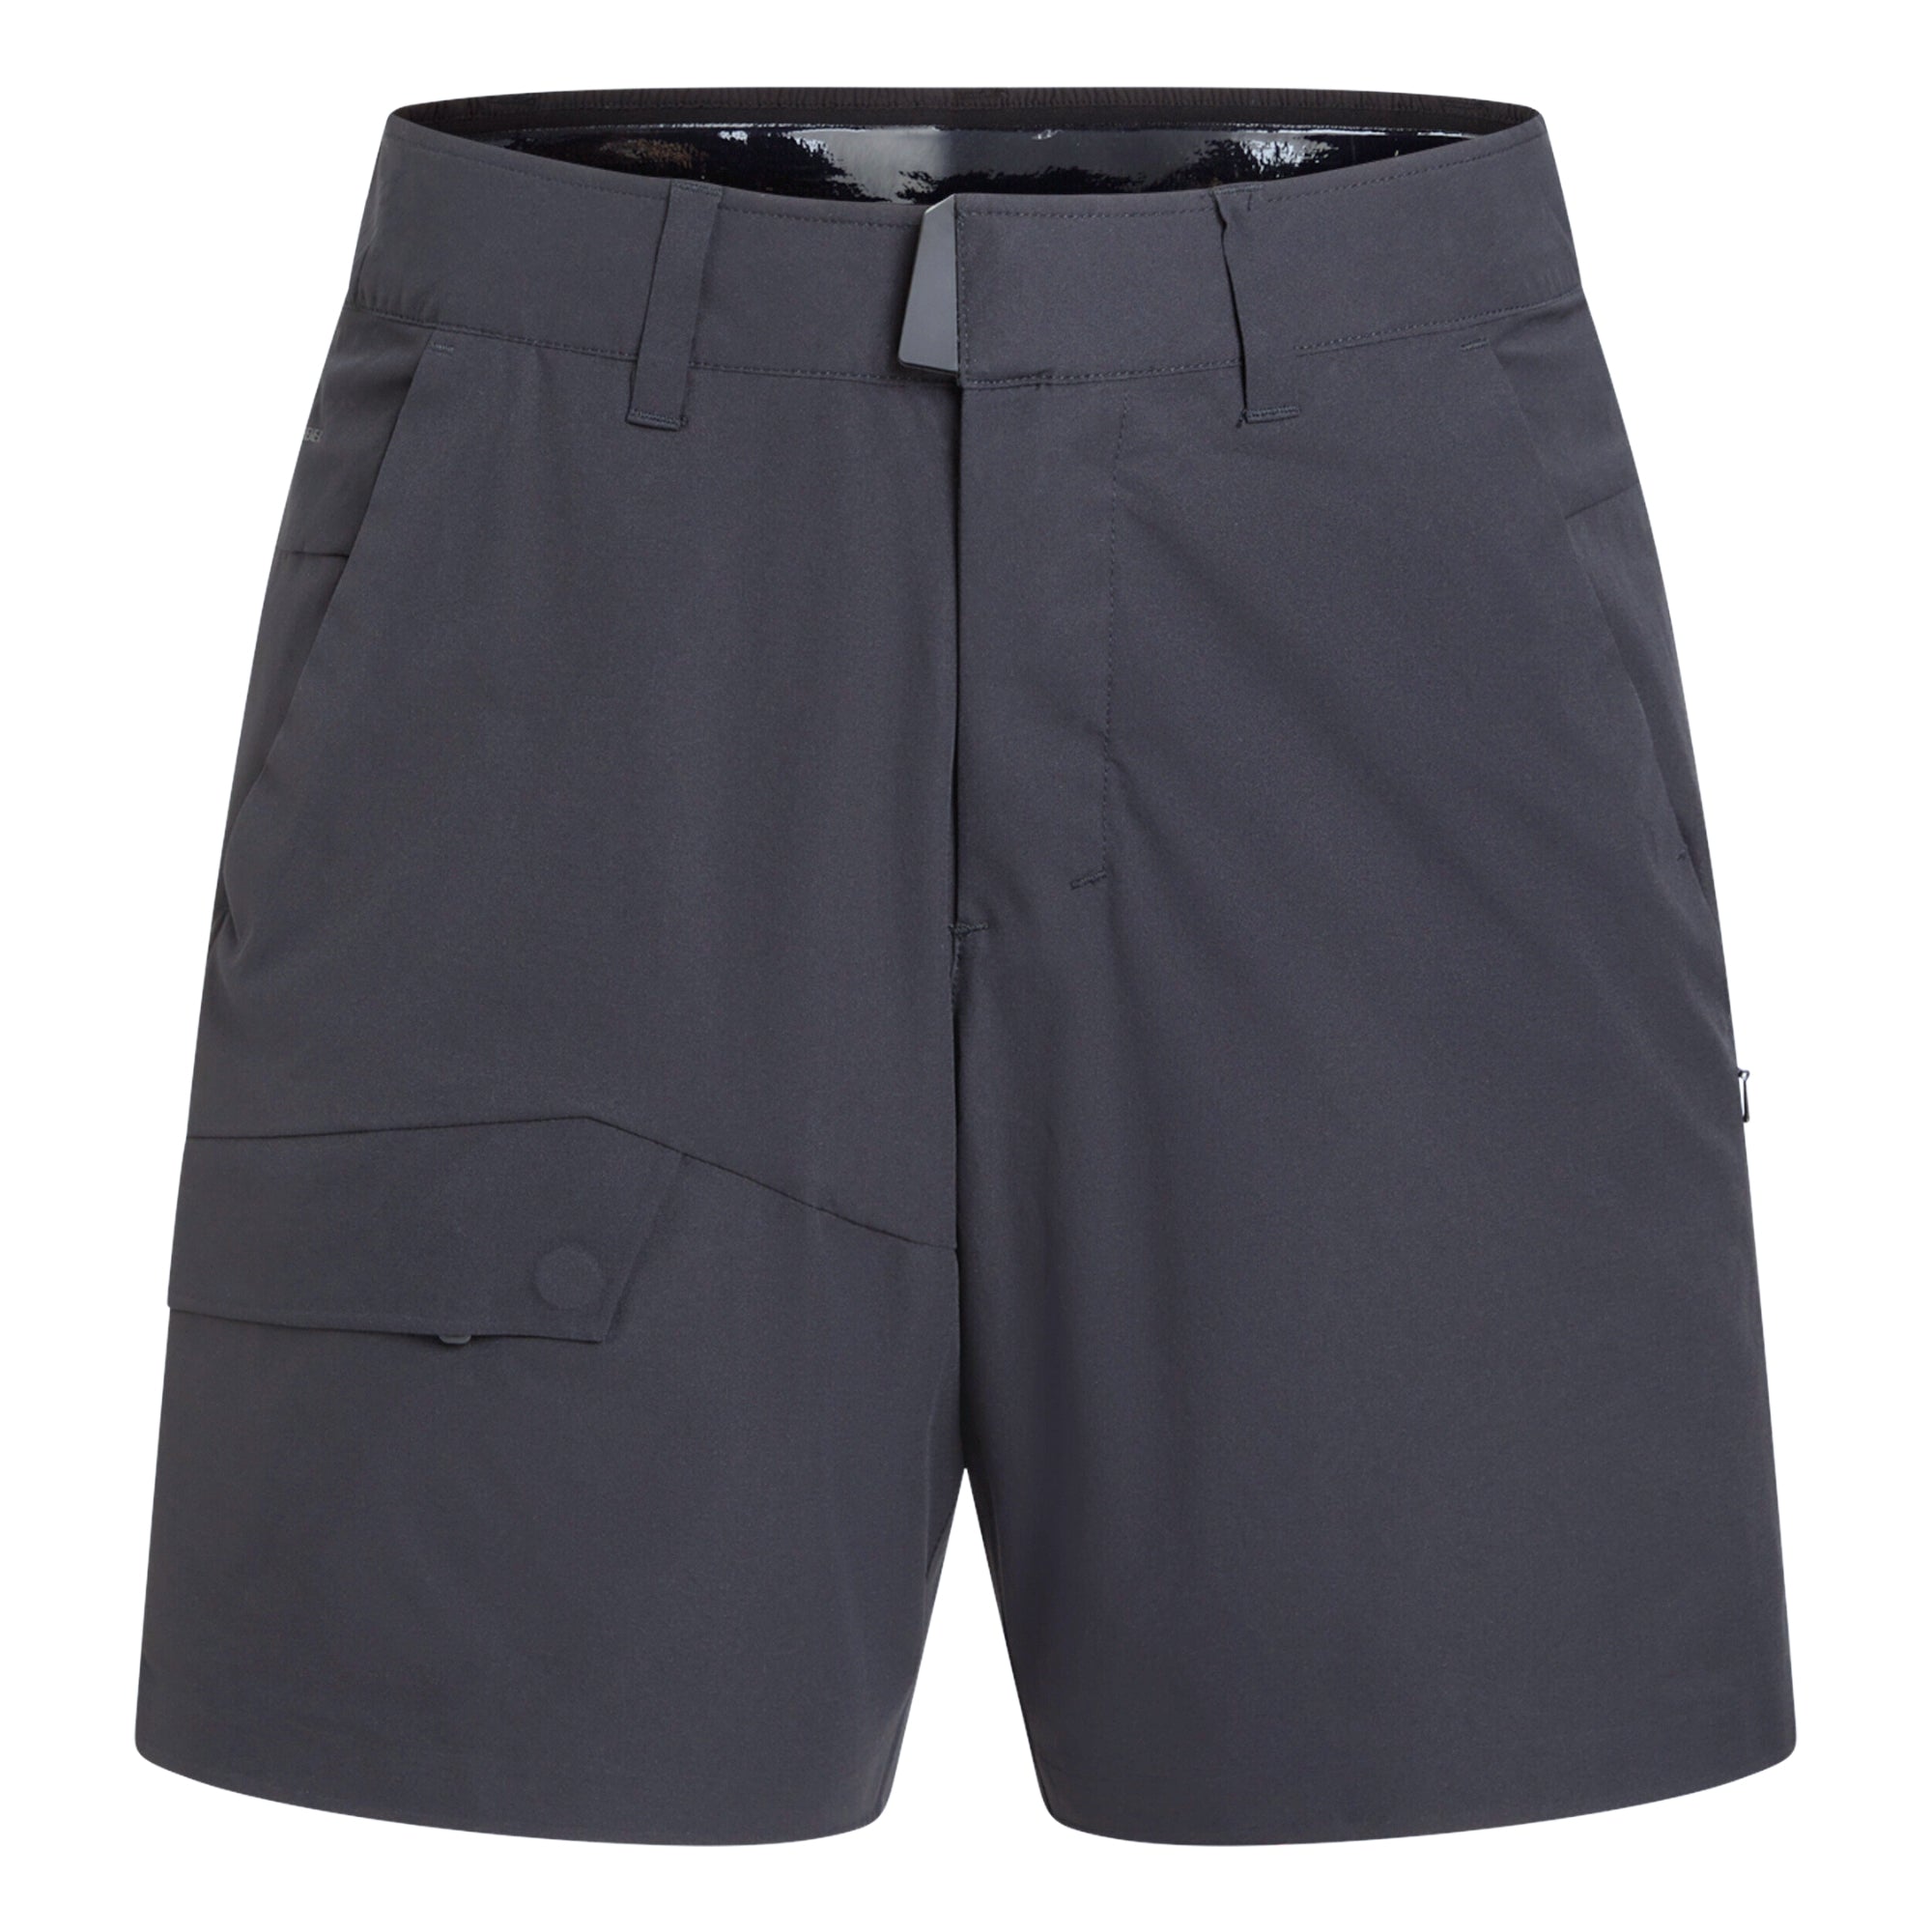 All Rounder Shorts / Everyday Performance Series - Graphene X